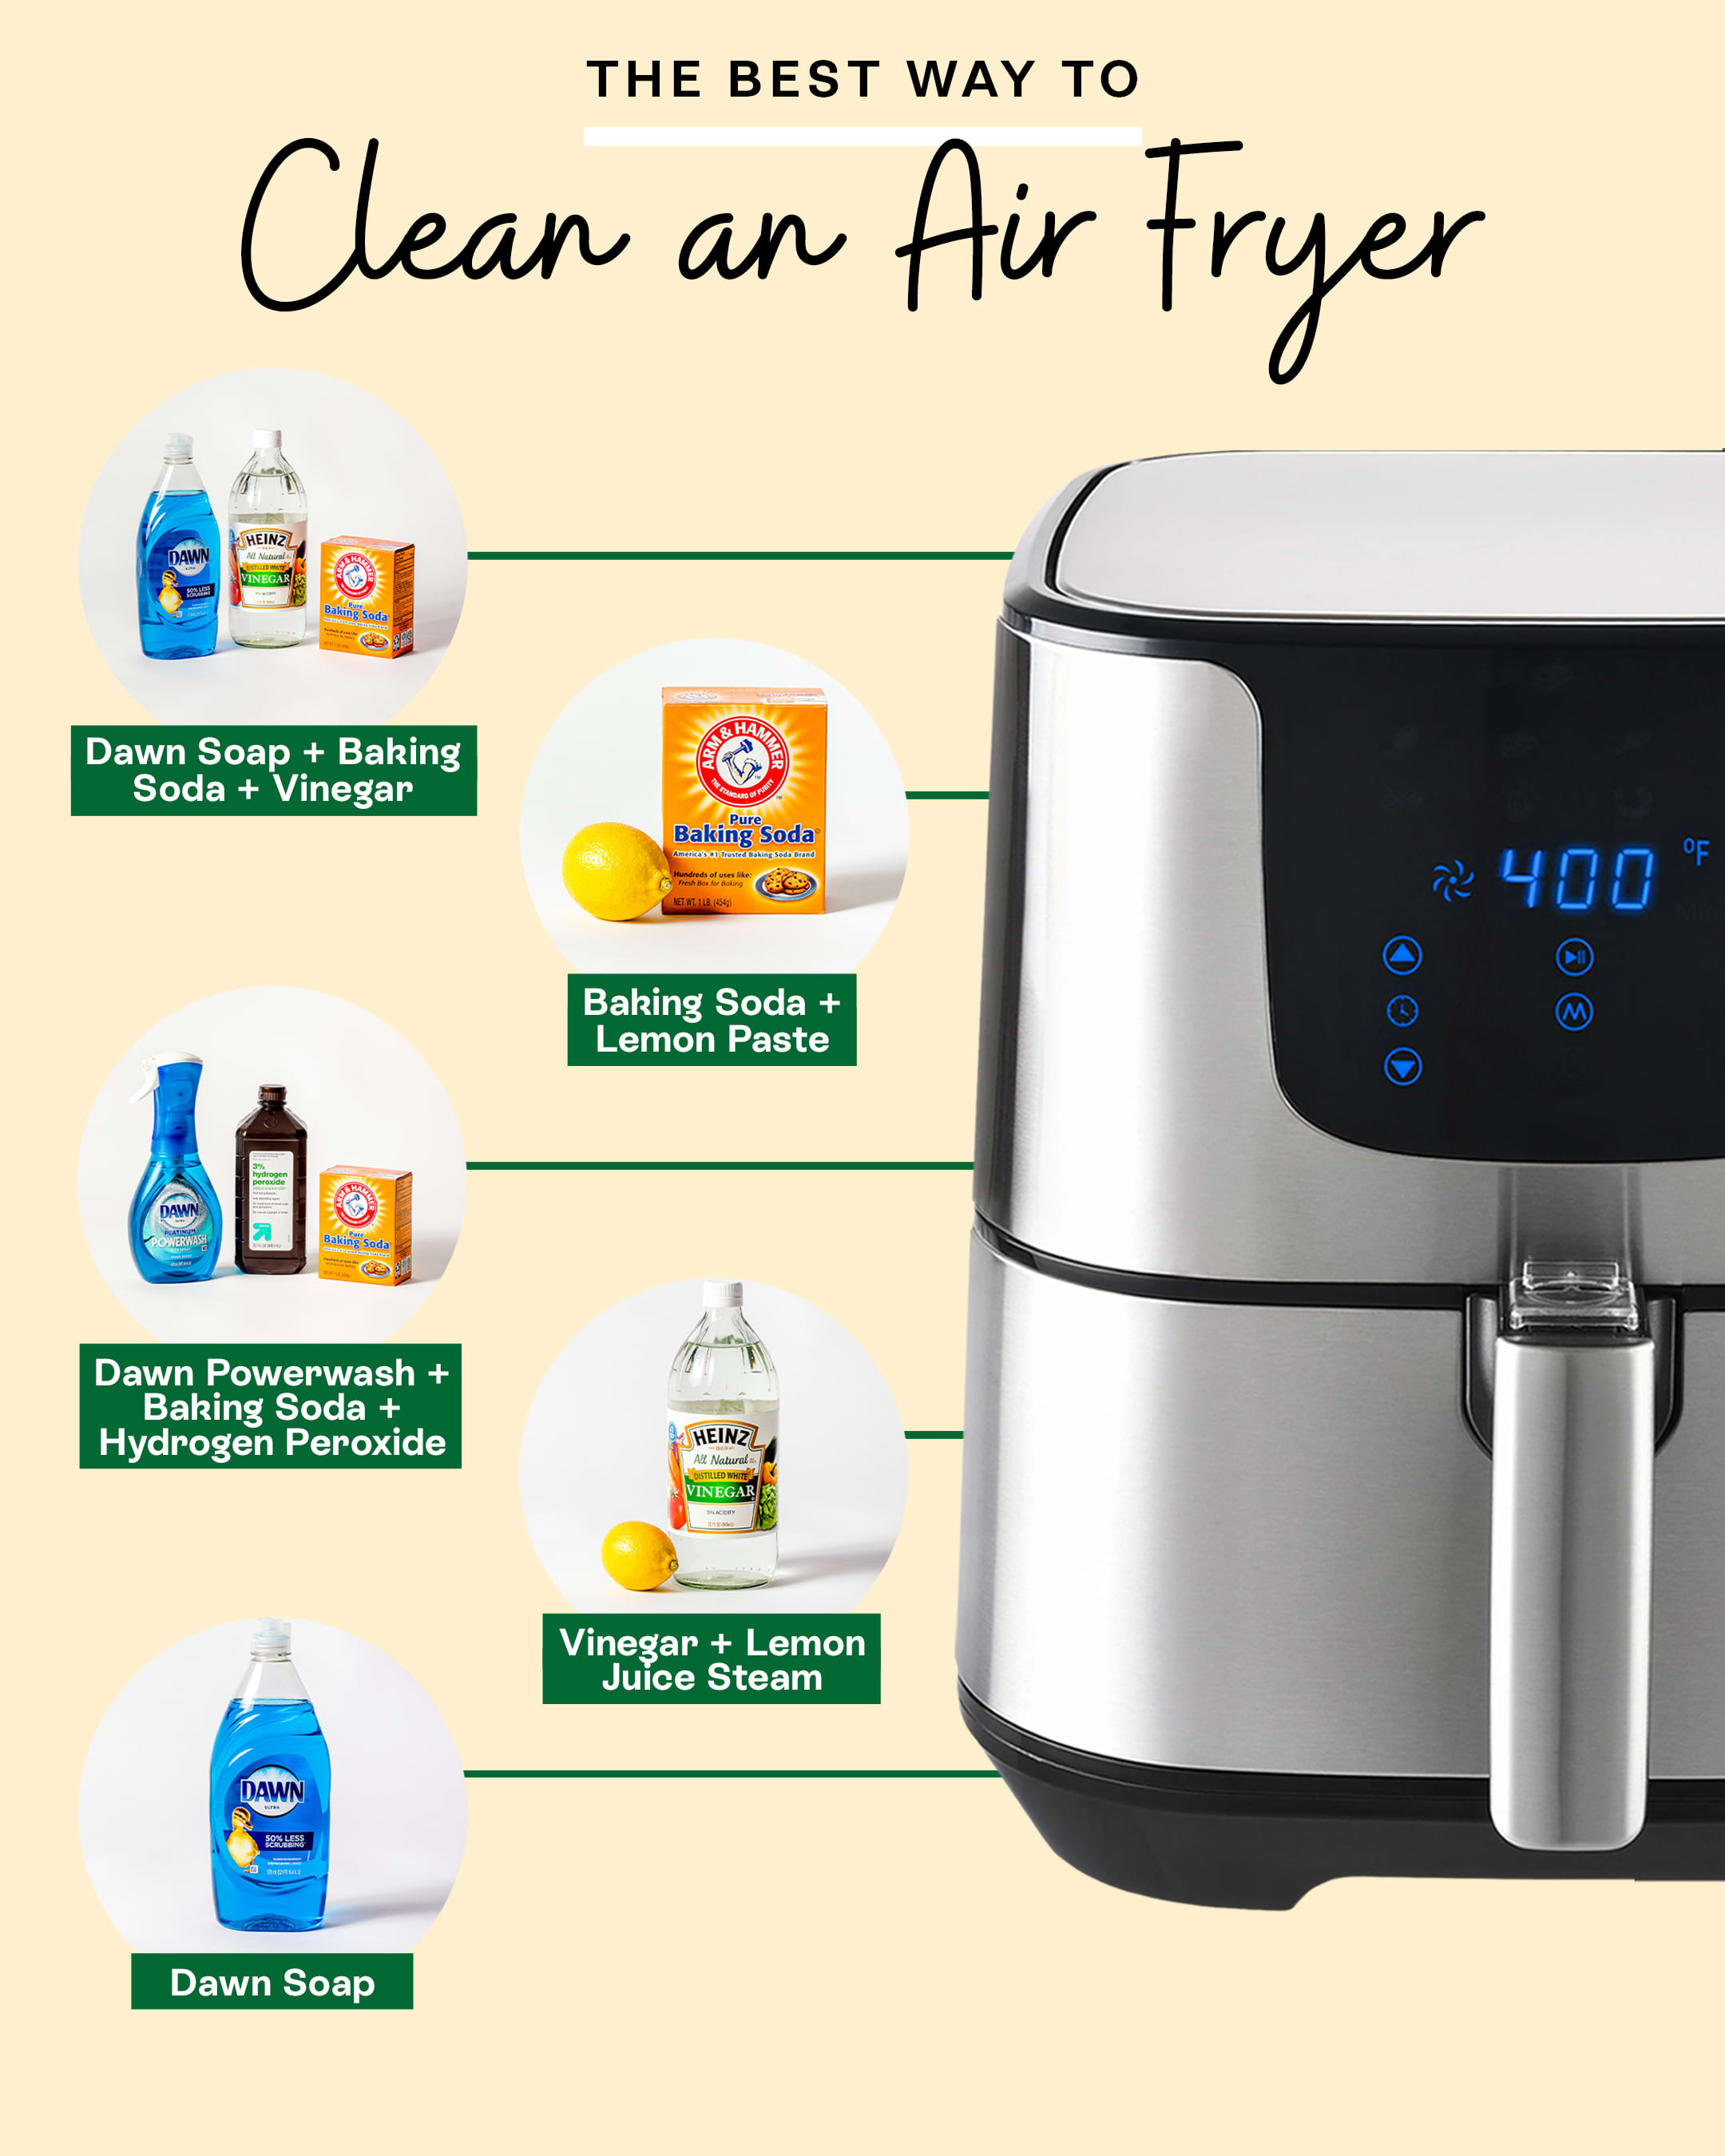 Air Fryer Grease Build-up? Now It's the Era of Self-Cleaning!